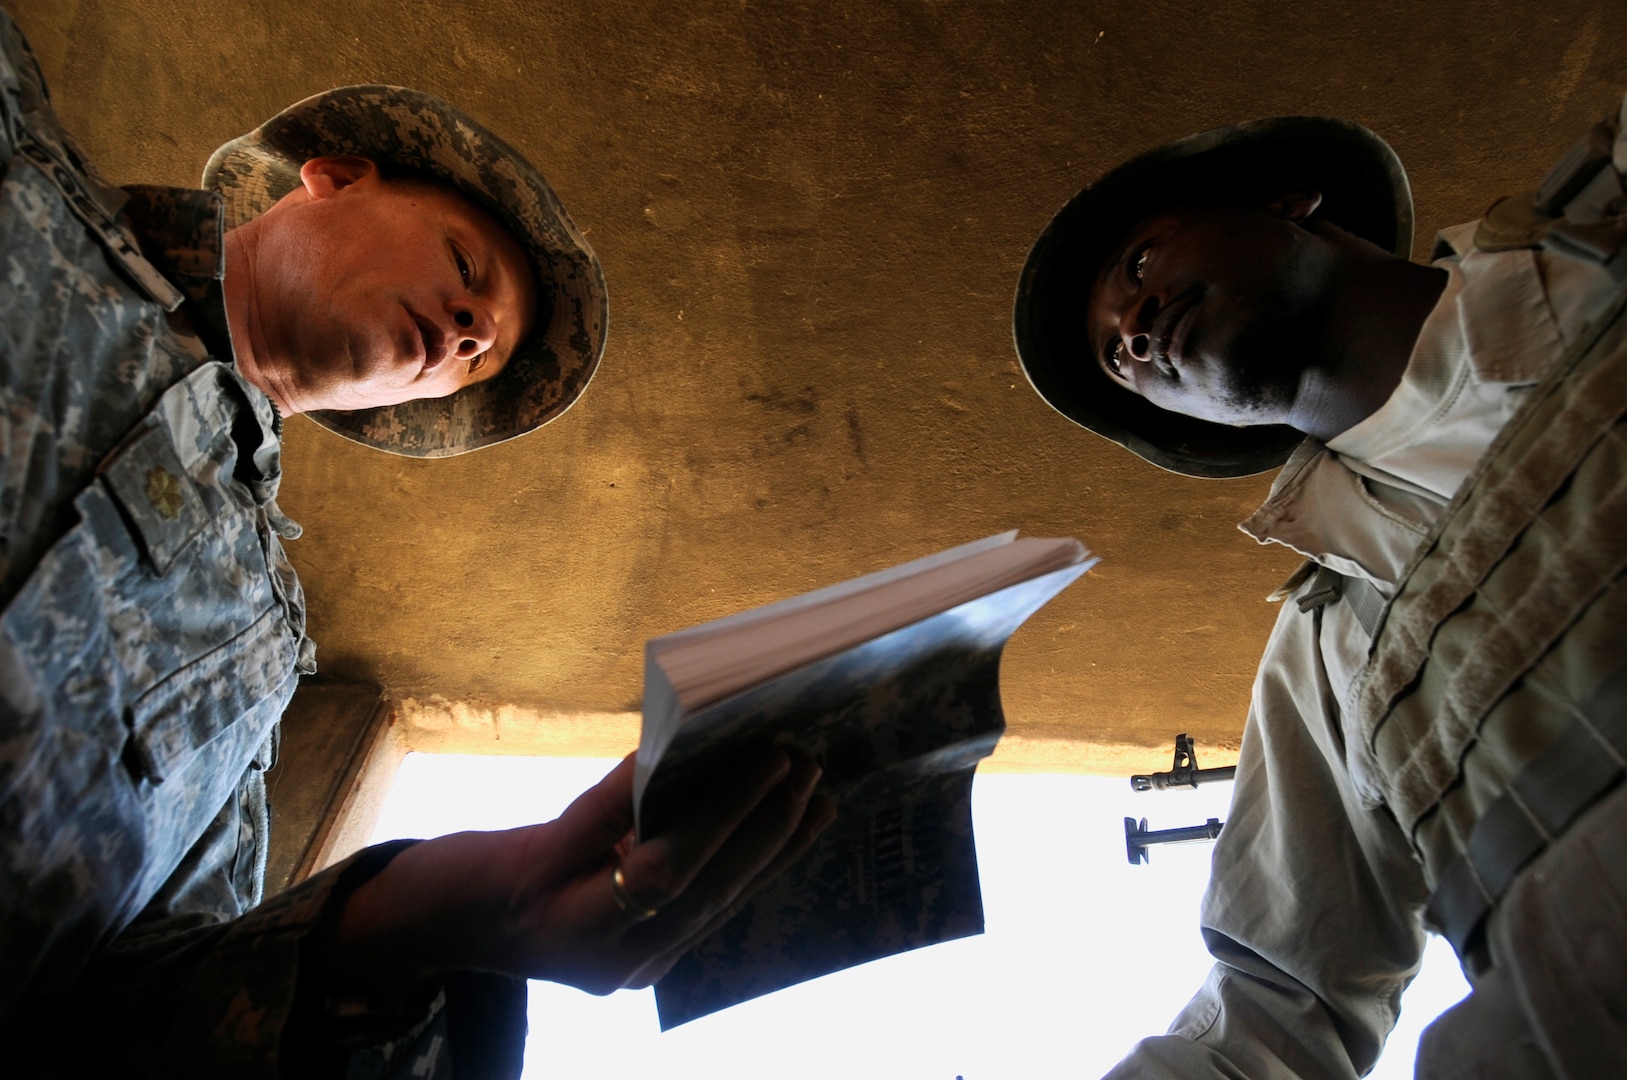 Chaplain with 2nd Battalion, 114th Strike Field Artillery Regiment, Mississippi National Guard, reads passage from Bible during visit with Ugandan security
guards in security tower at Forward Operating Base, Marez, Mosul, Iraq, September 24, 2009 (U.S. Navy/Carmichael Yepez)